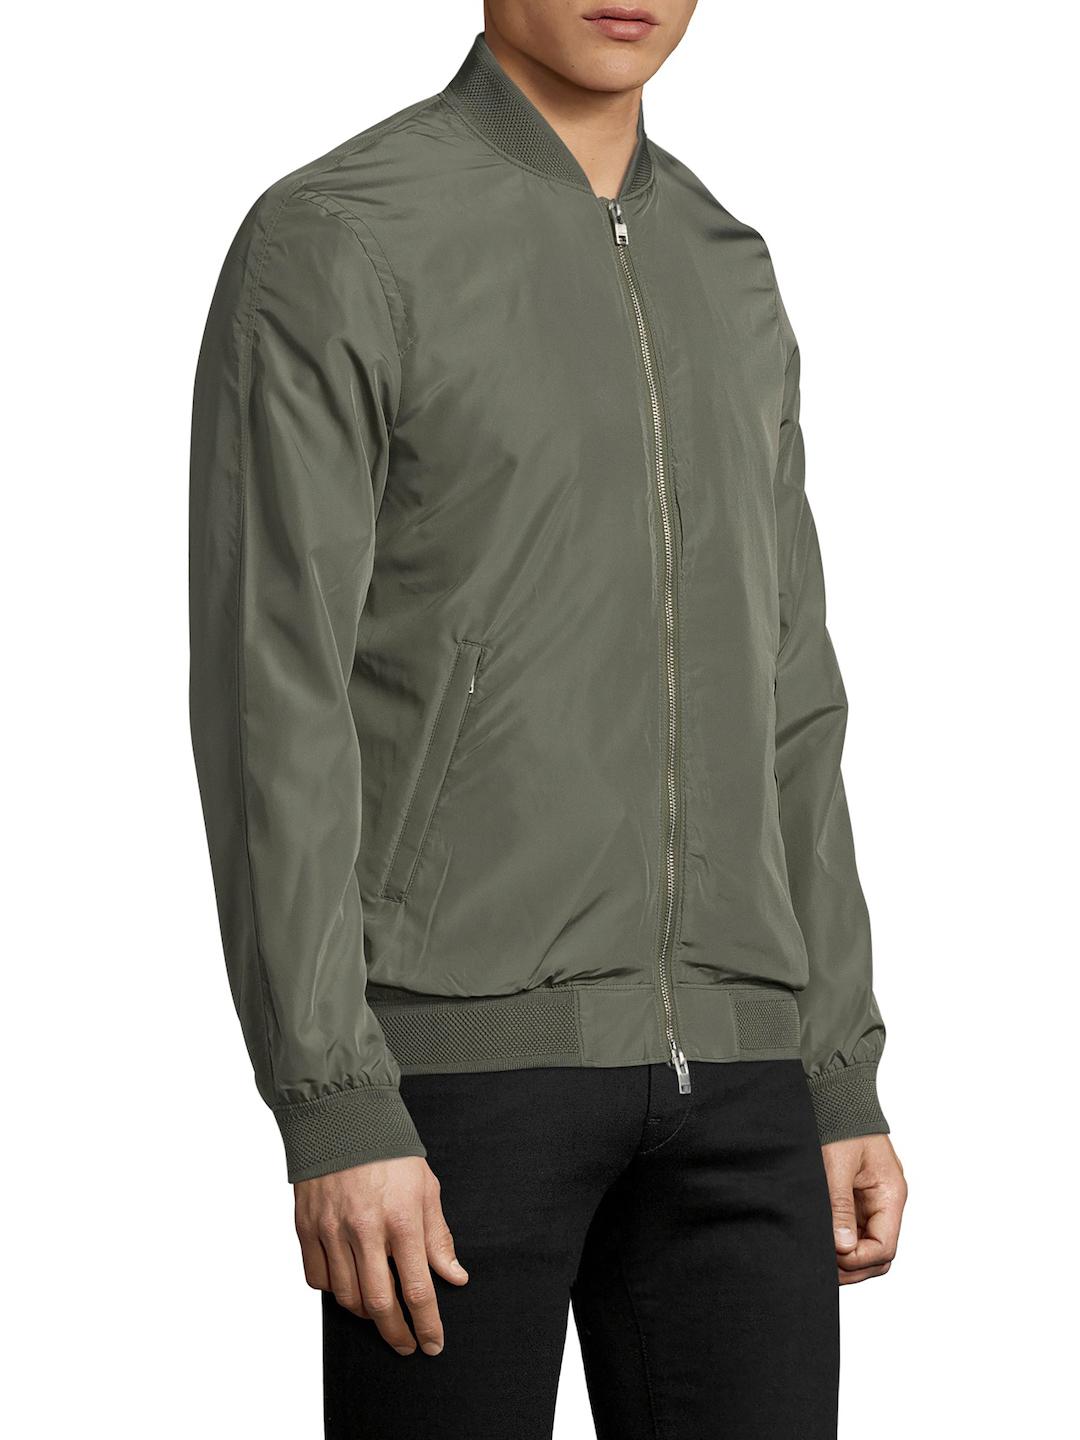 J.Lindeberg Synthetic Thom 72 Gravity Bomber Jacket in Military Green  (Green) for Men - Lyst